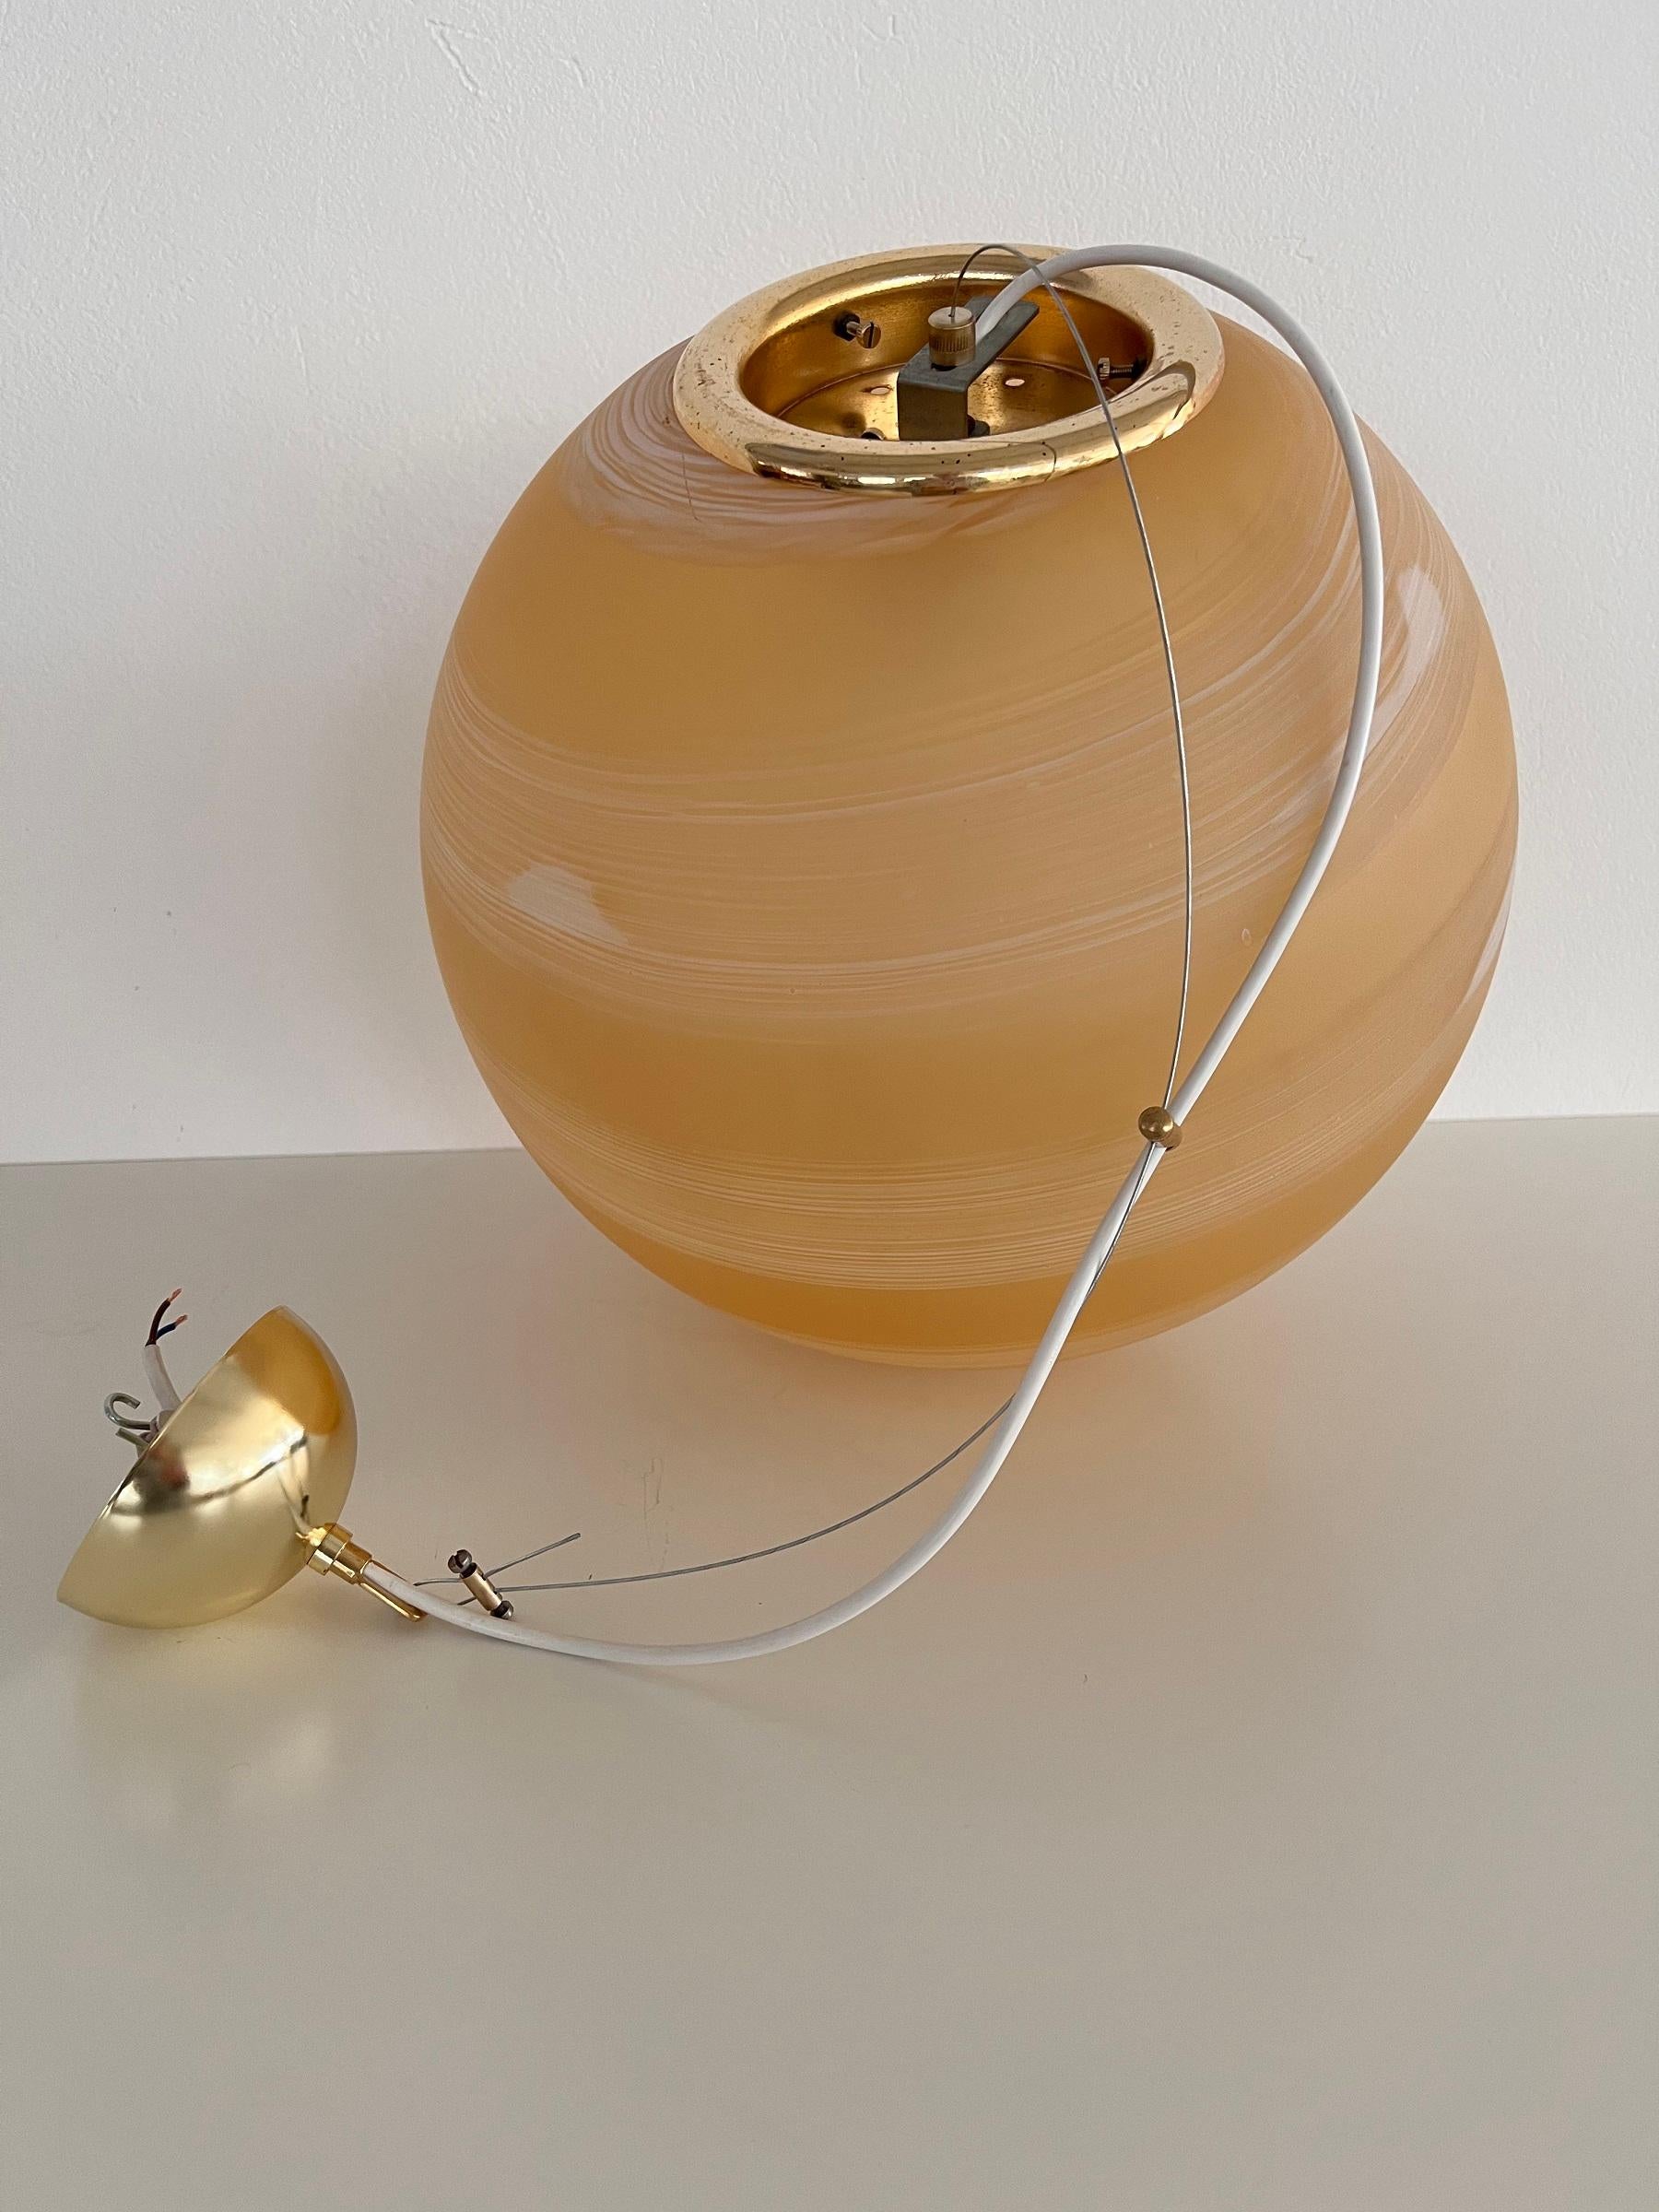 Italian Mid-Century Murano Glass Globe Chandelier with Brass Details, 1970s For Sale 4